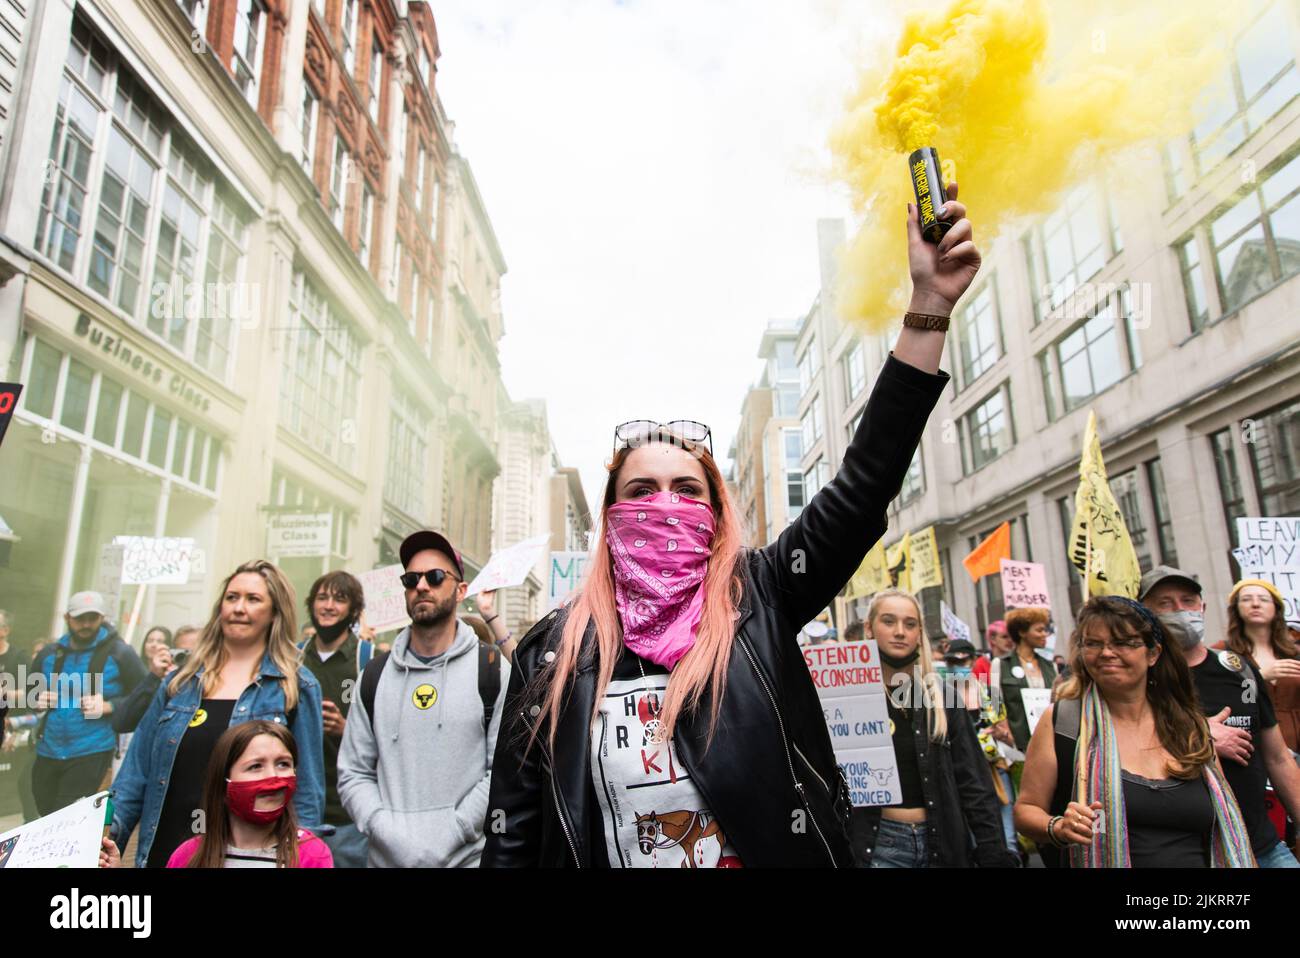 Animal rights activist leading march through London streets holding yellow flare 2021 Stock Photo